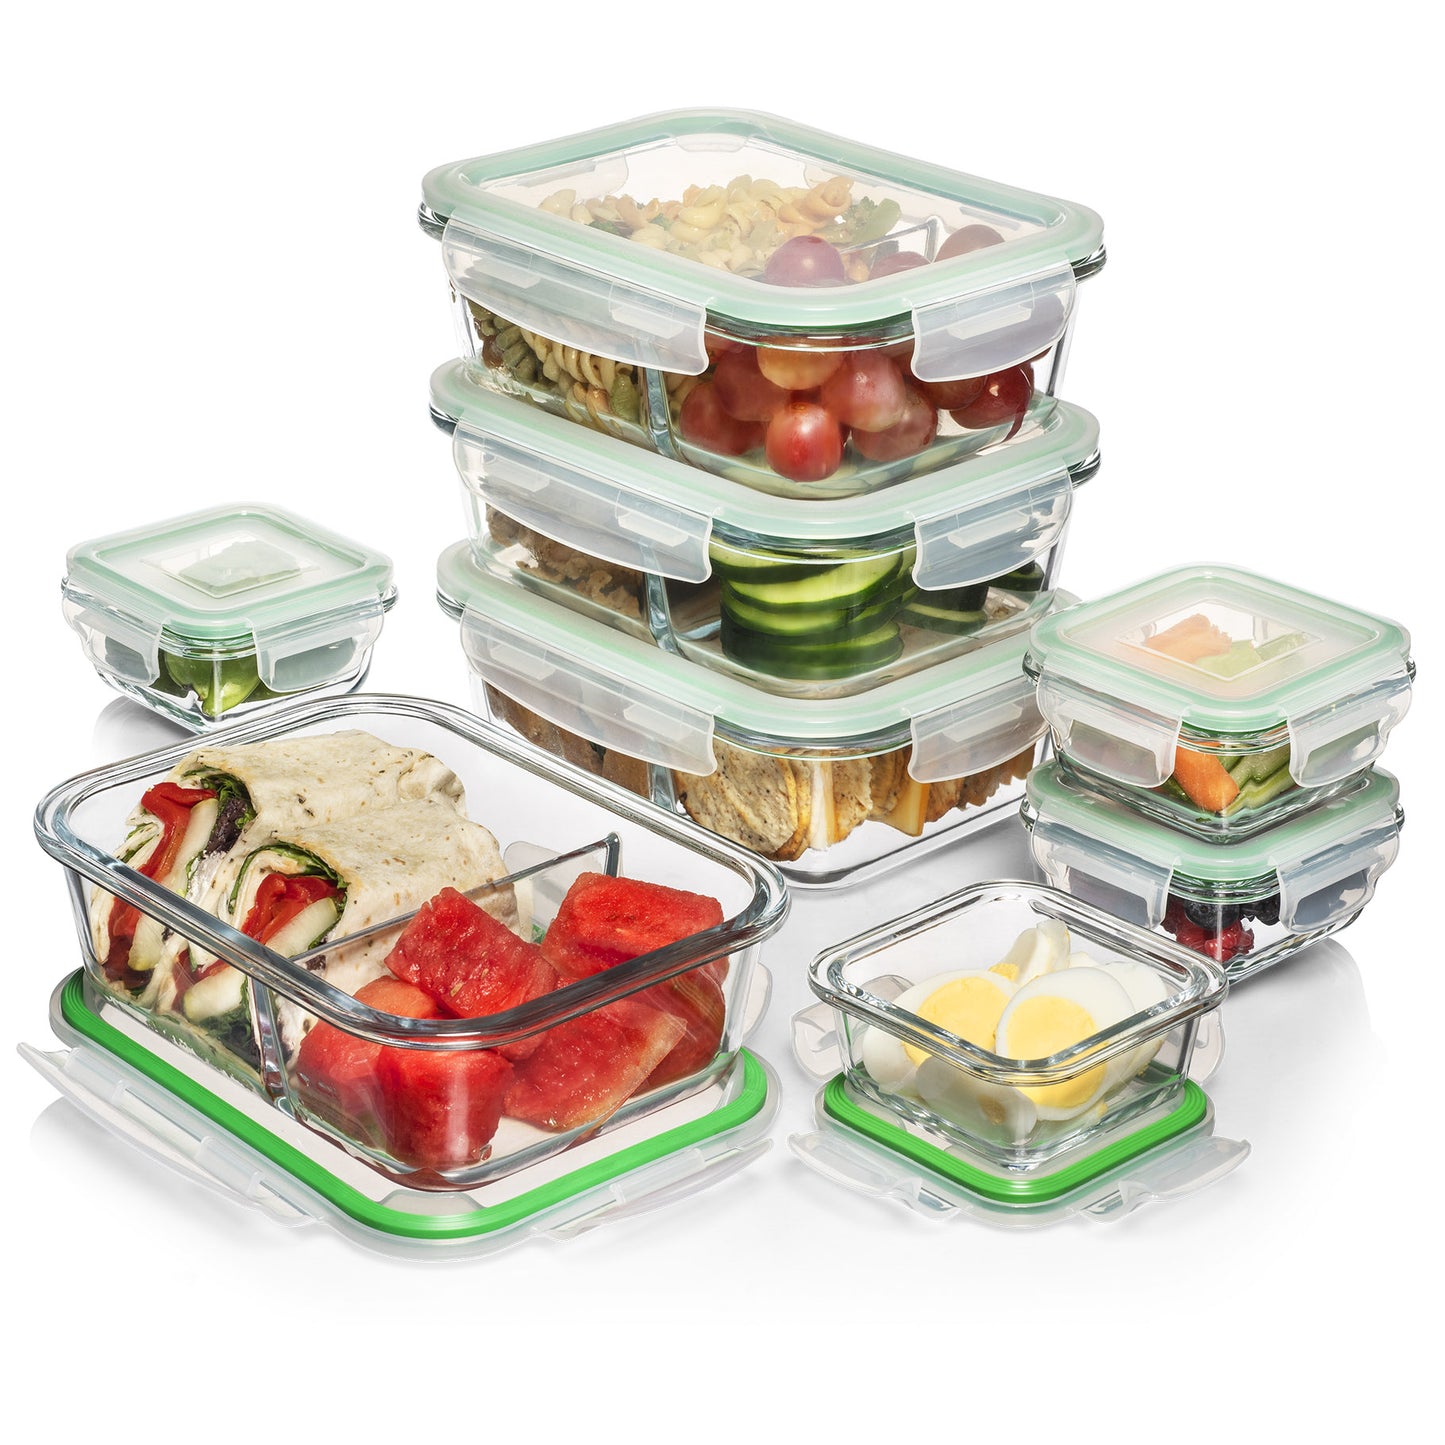 Glass Meal Prep Containers - 4-Pack 35 Oz. 3 Compartment Bento Box Lunch